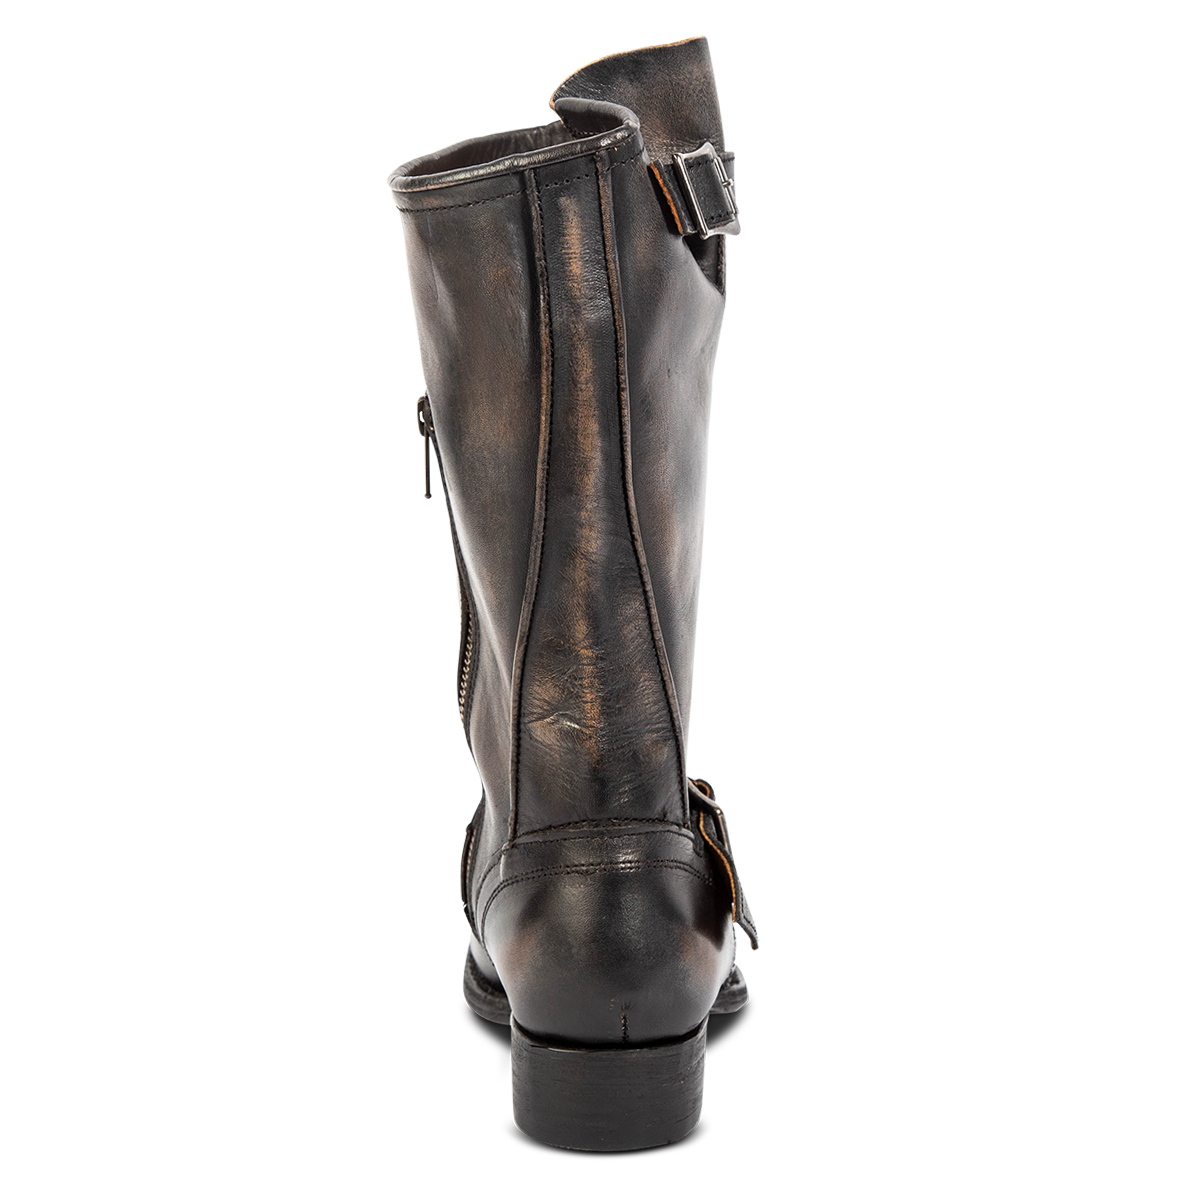 Back view showing an asymmetrical shaft height and low block heel on FREEBIRD women's Rip black leather boot